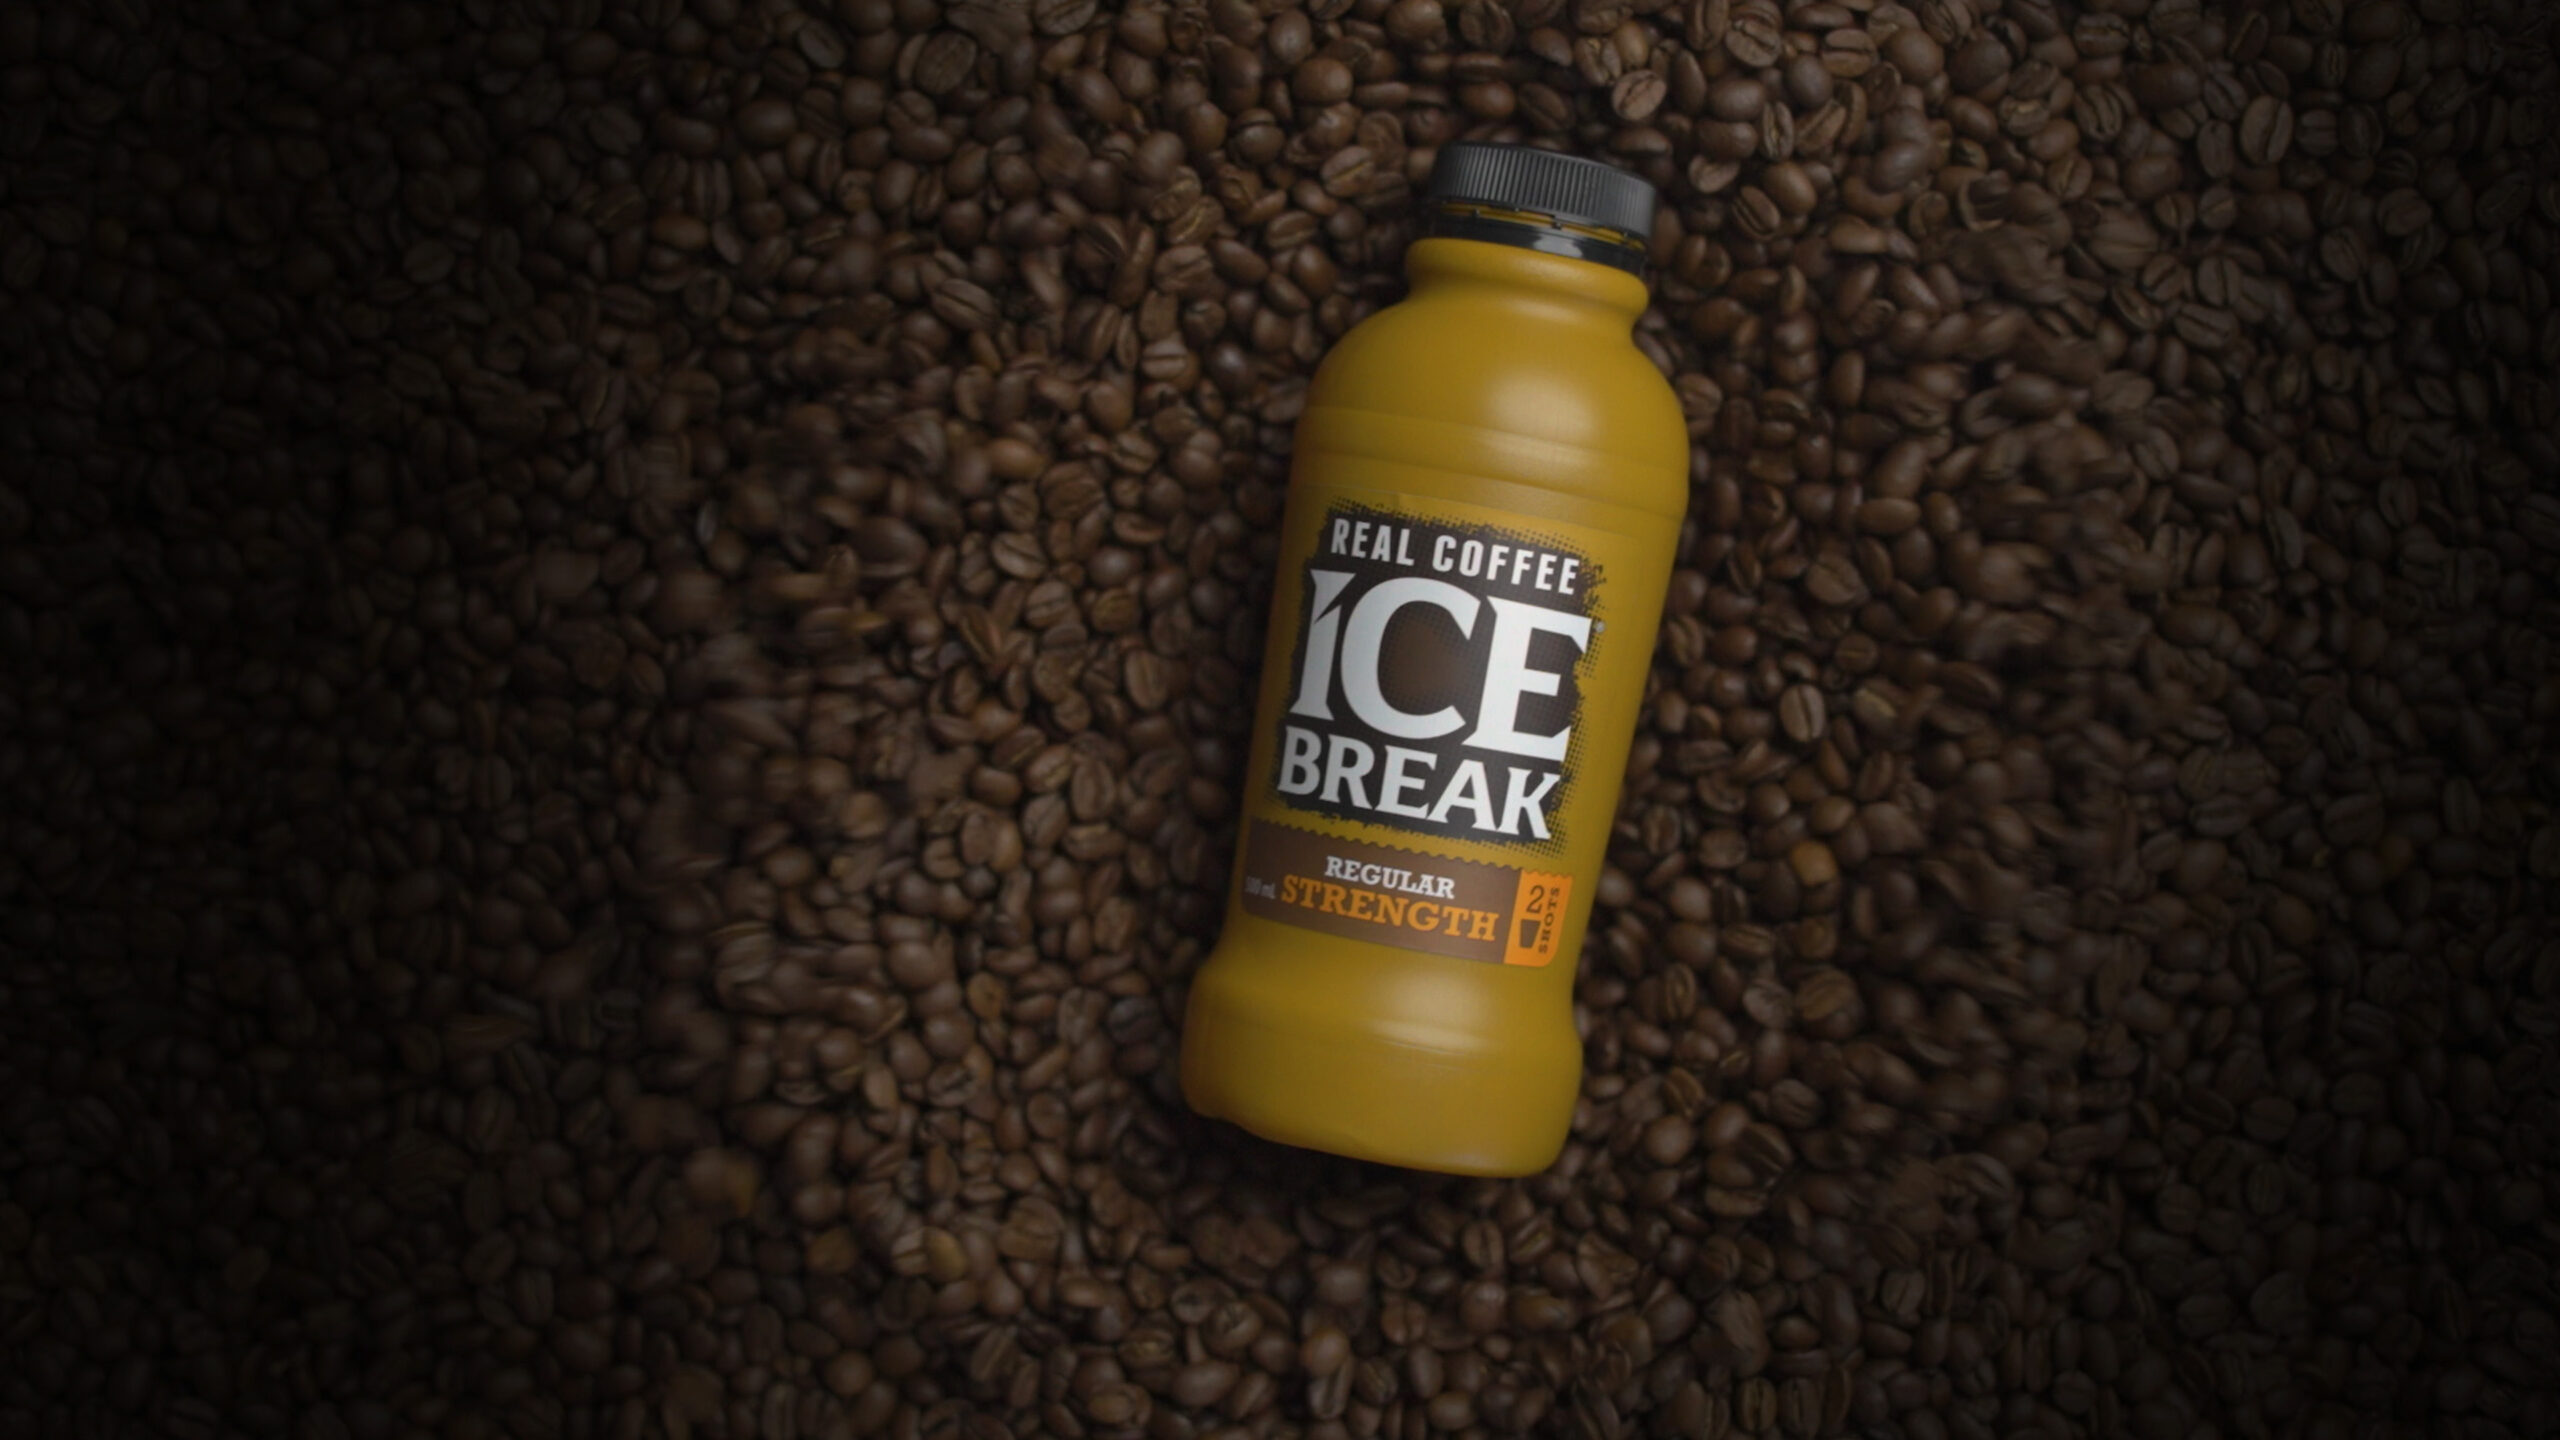 Ice Break Product Video by Brisbane Content Creator